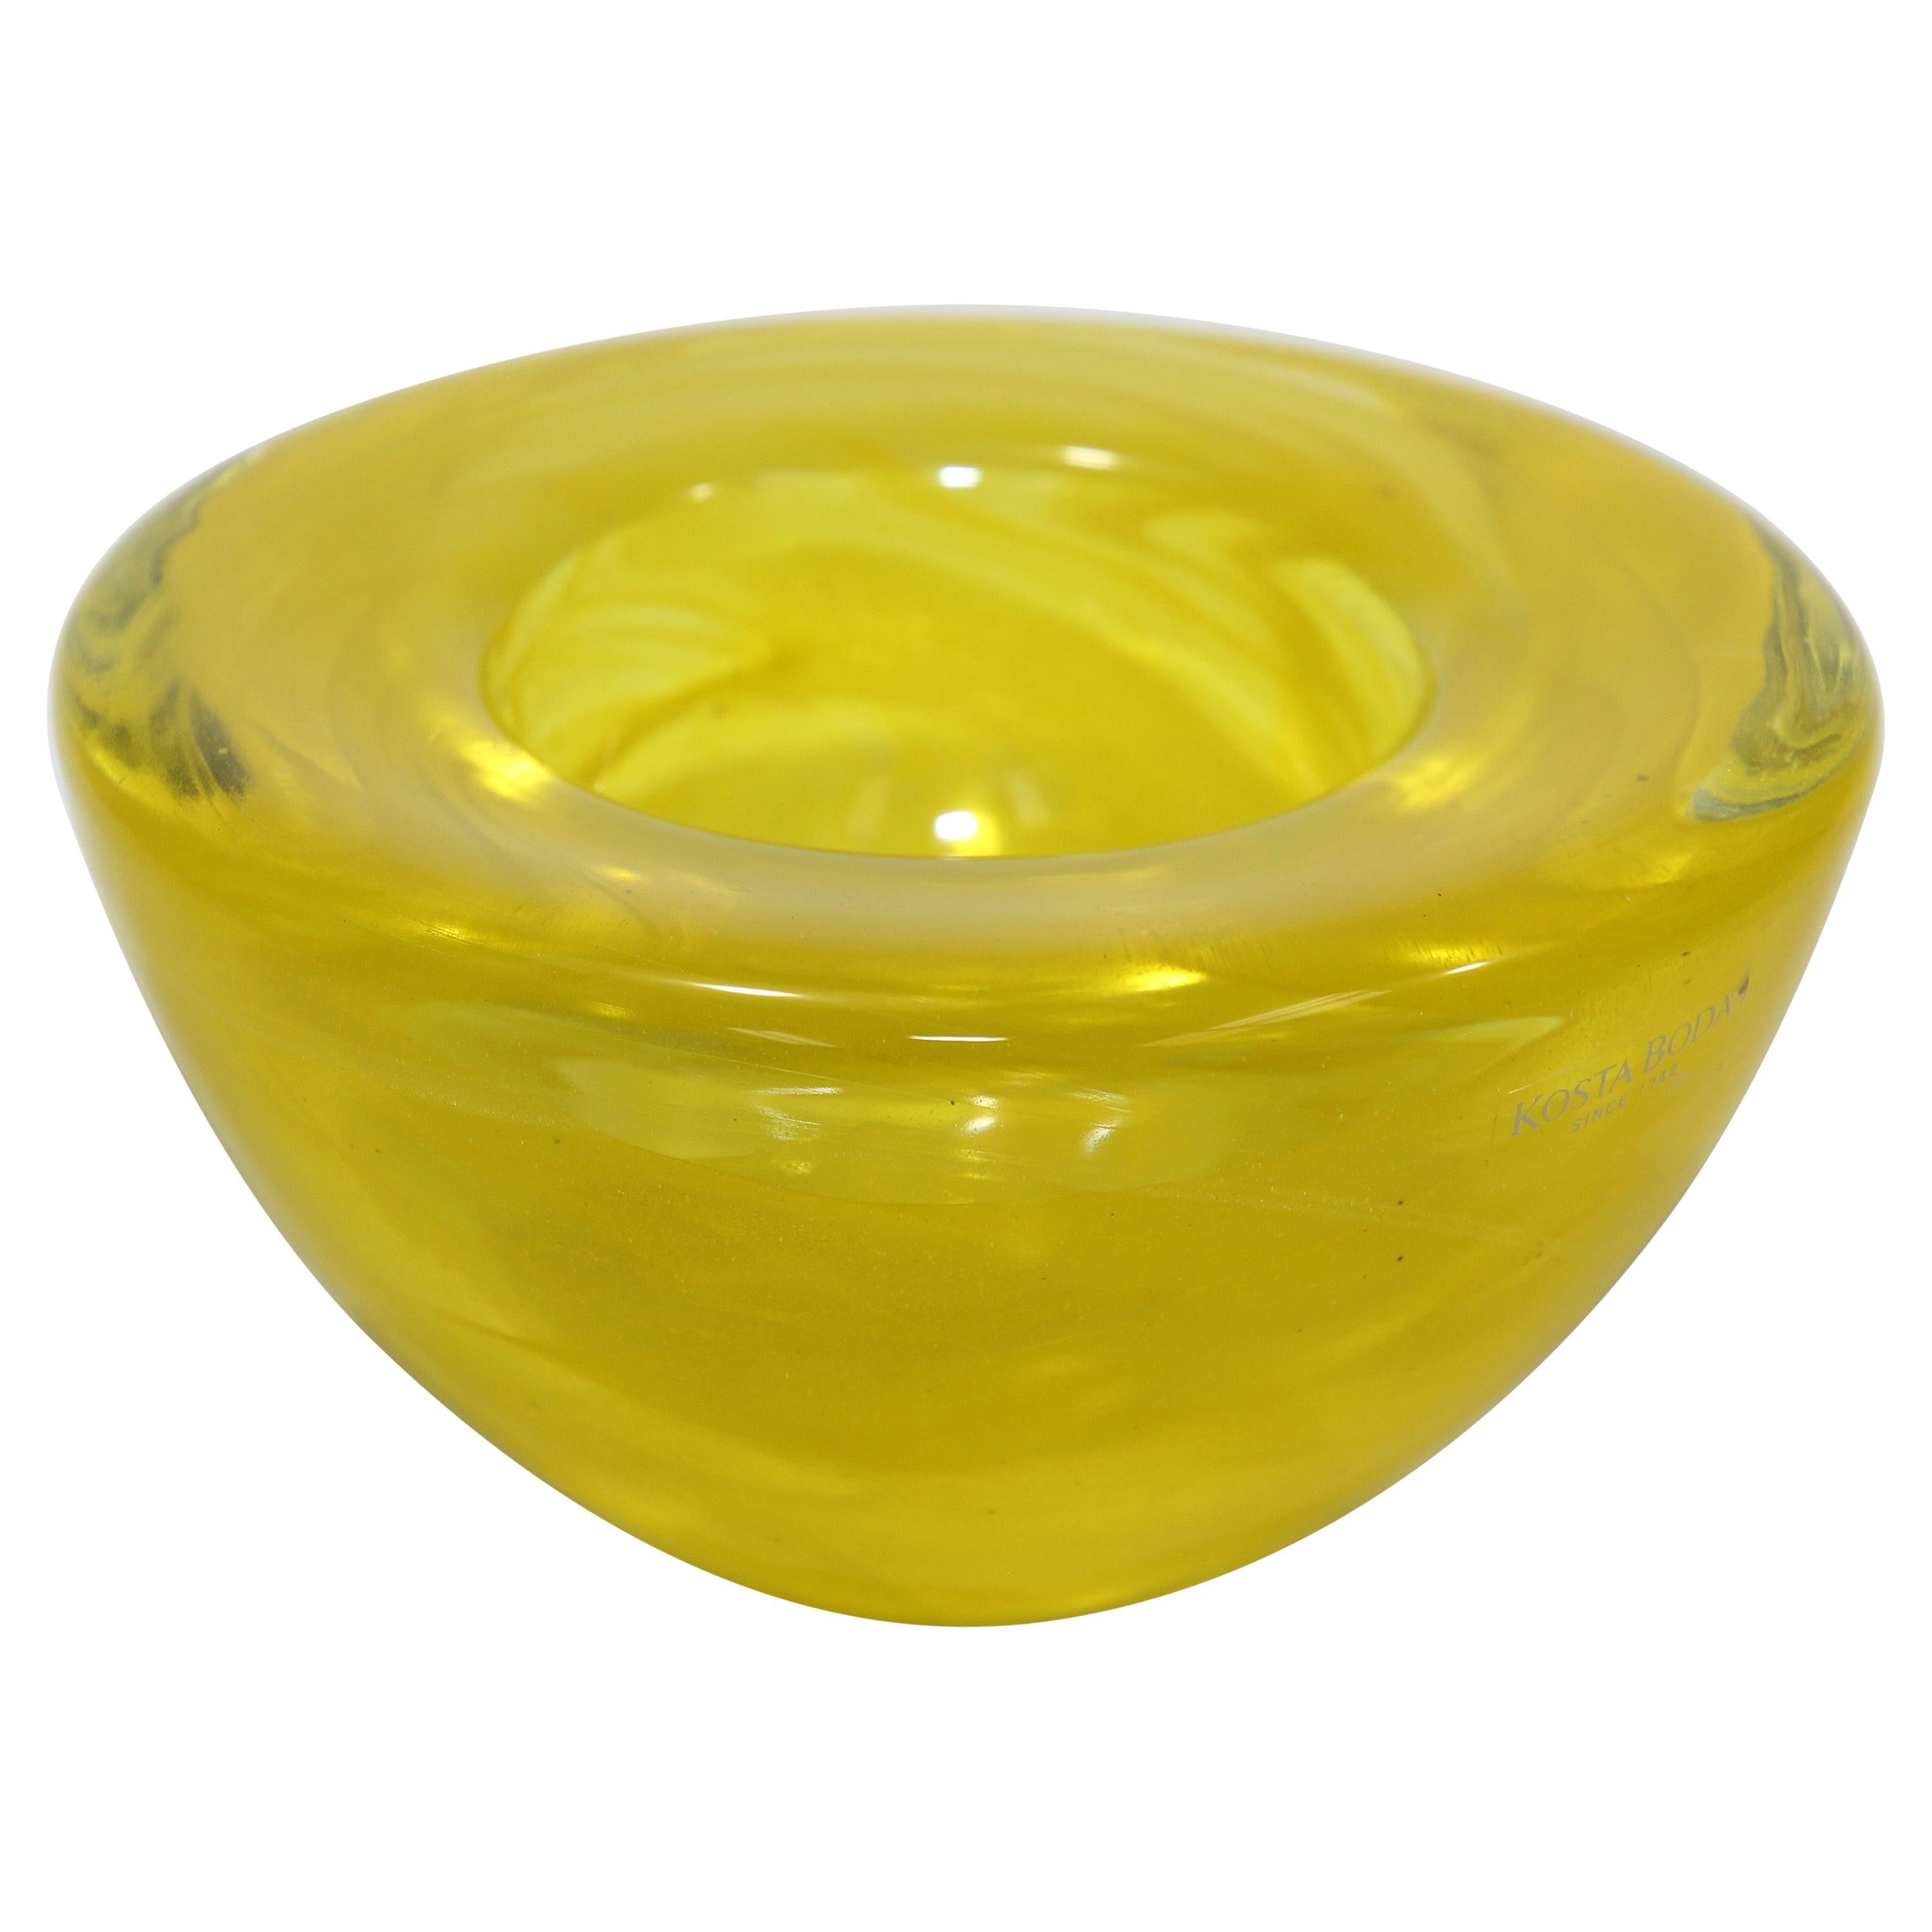 Kosta Boda Yellow Crystal Candle Holder by Anna Ehrner, 1990's For Sale